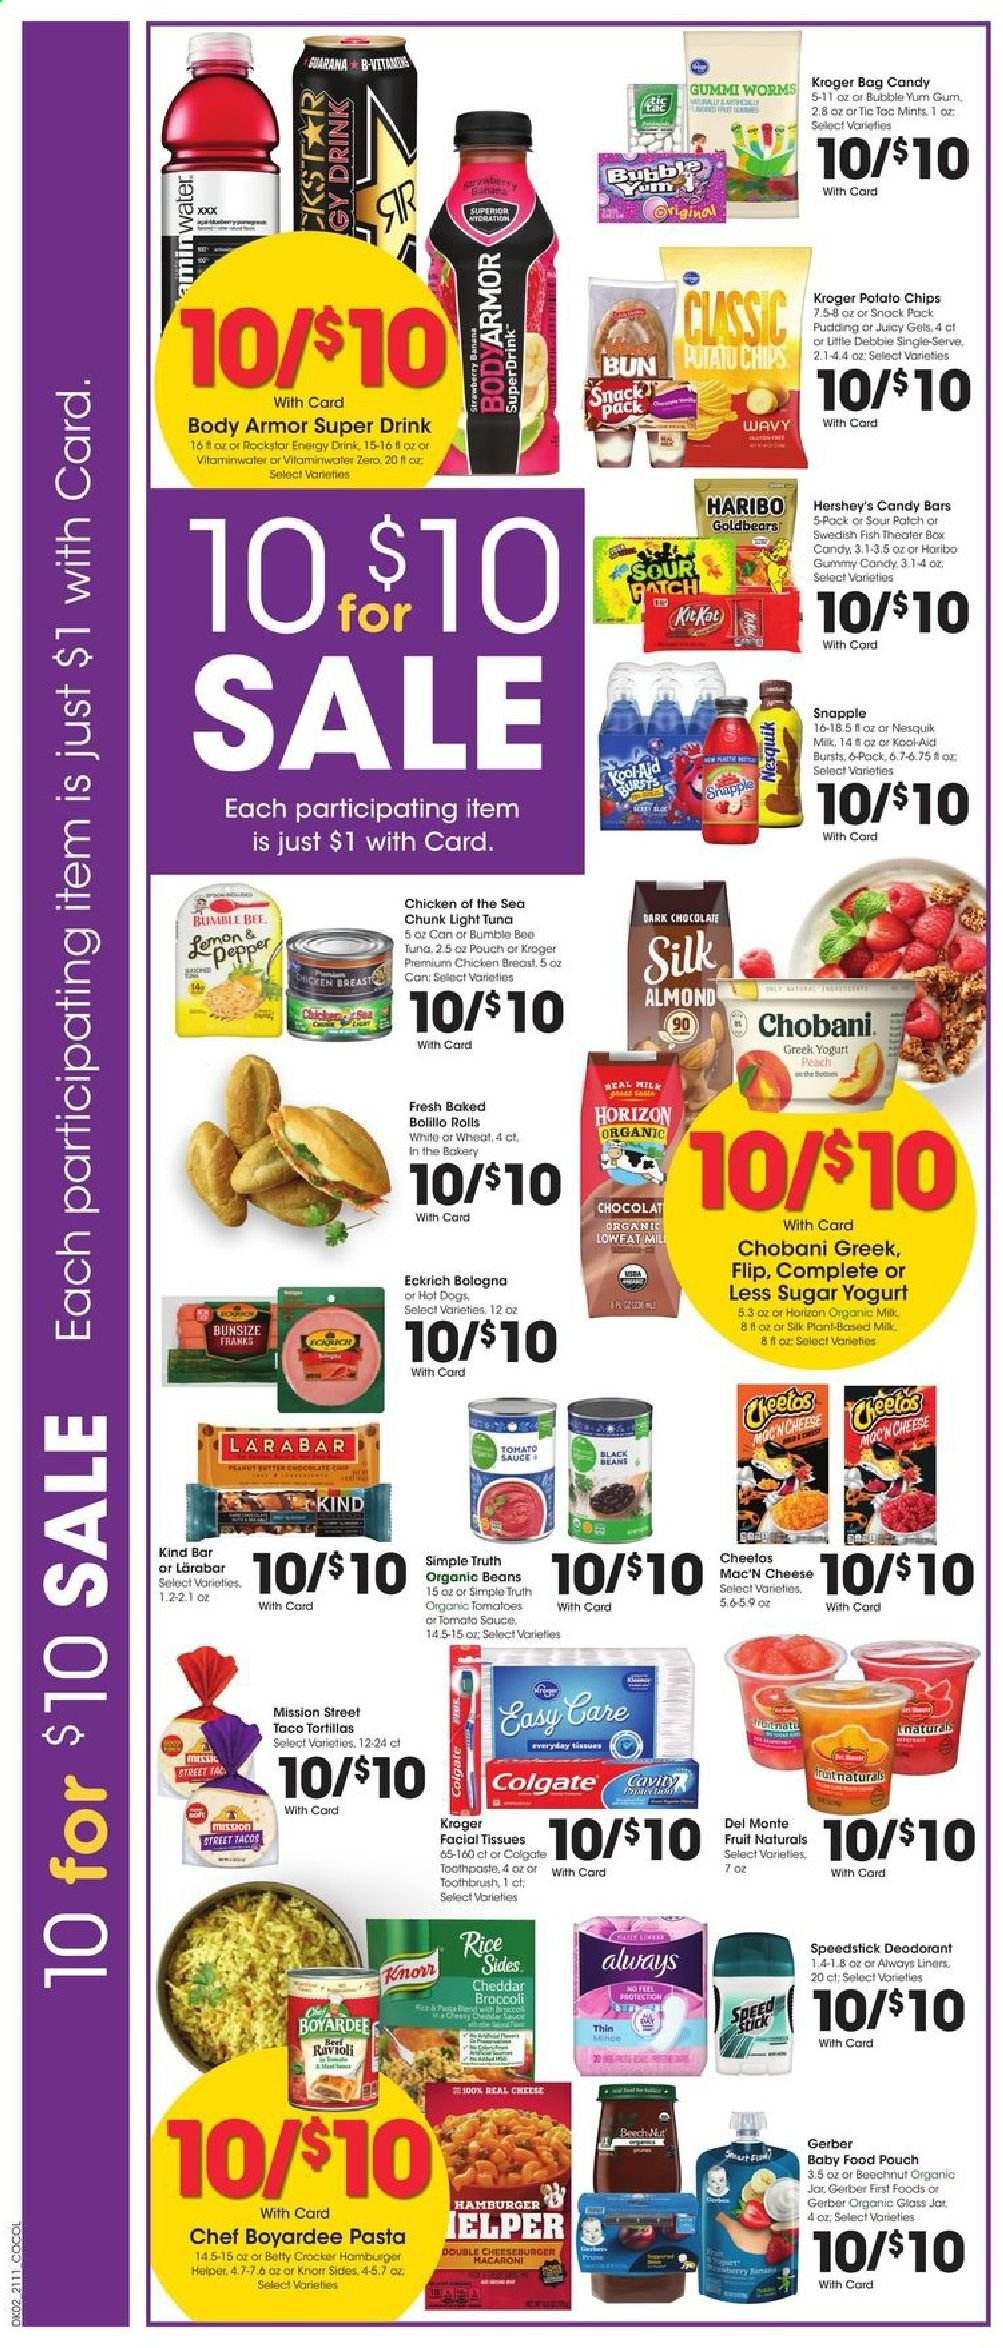 thumbnail - Kroger Flyer - 04/14/2021 - 04/20/2021 - Sales products - tortillas, tacos, beans, tomatoes, tuna, hot dog, Bumble Bee, Knorr, cheeseburger, bologna sausage, cheese, greek yoghurt, pudding, yoghurt, Nesquik, Chobani, milk, Silk, Hershey's, chocolate, Haribo, dark chocolate, Sour Patch, Gerber, potato chips, chips, tomato sauce, light tuna, Chicken of the Sea, Chef Boyardee, rice, pasta, energy drink, Snapple, baby food pouch, chicken breasts, tissues, Always liners, Colgate, toothbrush, facial tissues, anti-perspirant, Speed Stick, deodorant, jar, bag, Body Armor. Page 3.